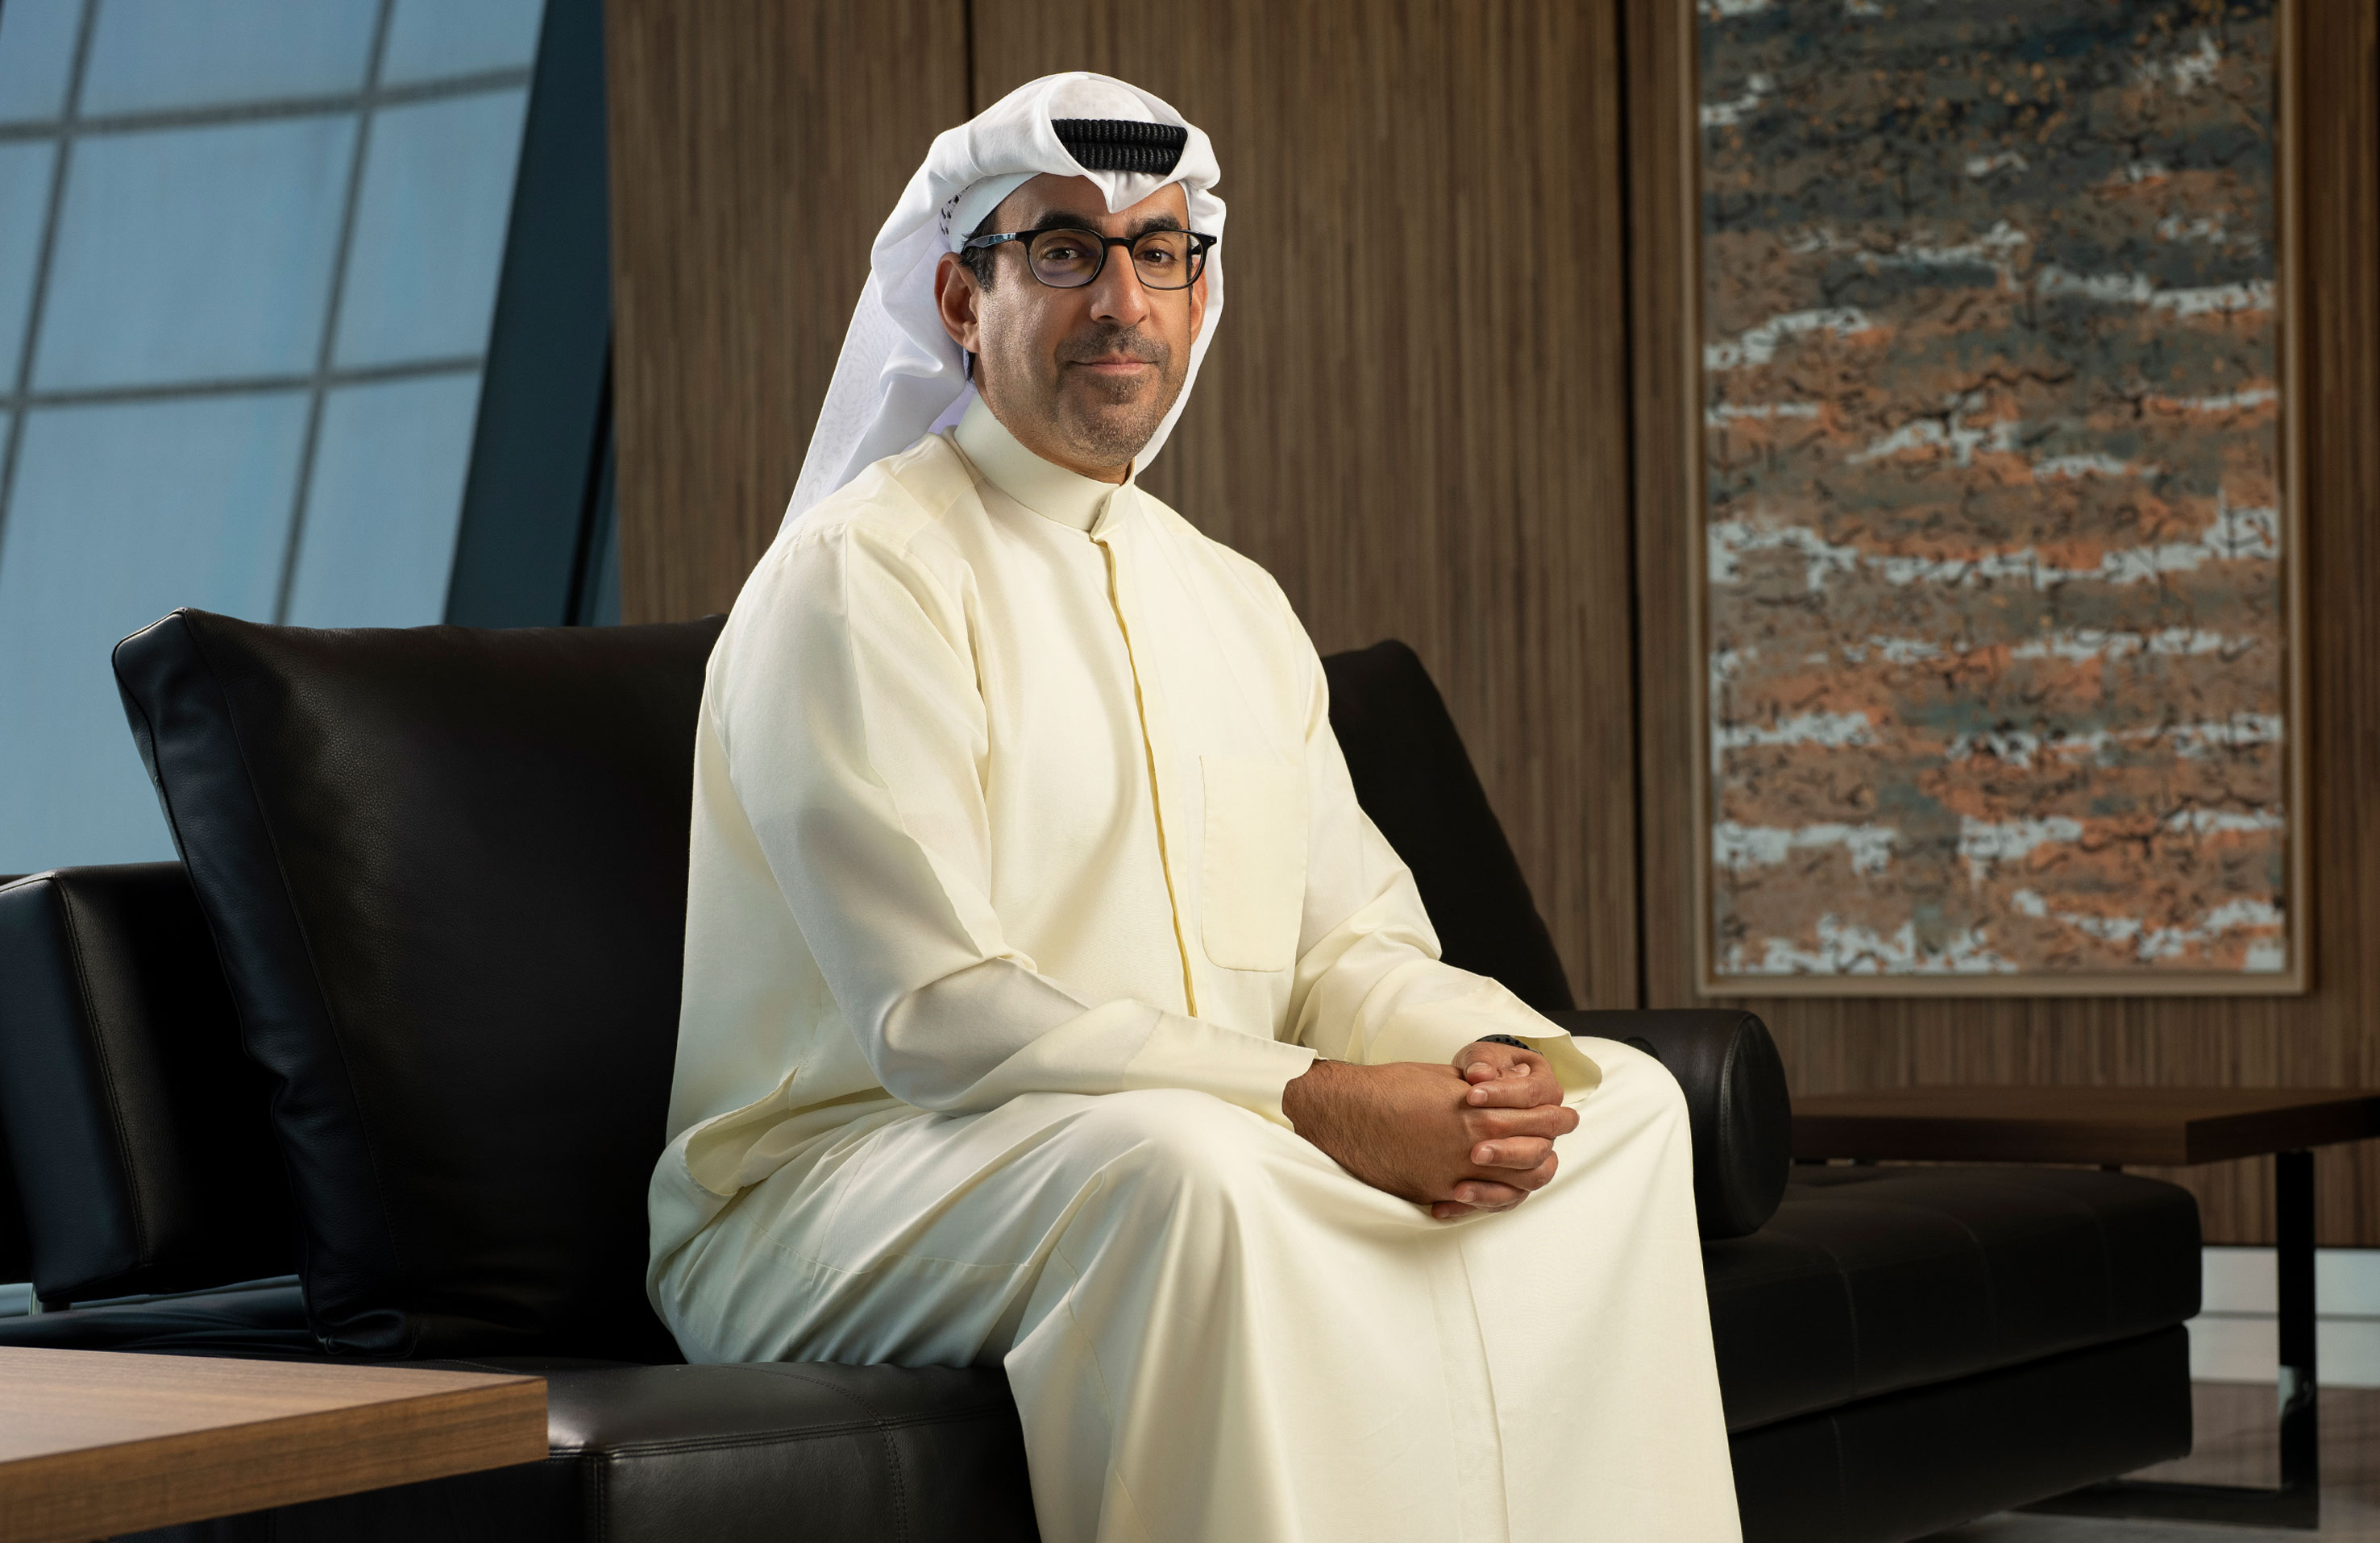 Exclusive: With Over $20B In AUM, Faisal Al-Hamad, CEO Of Kuwait's NBK Wealth, Is Now Eyeing Expansion